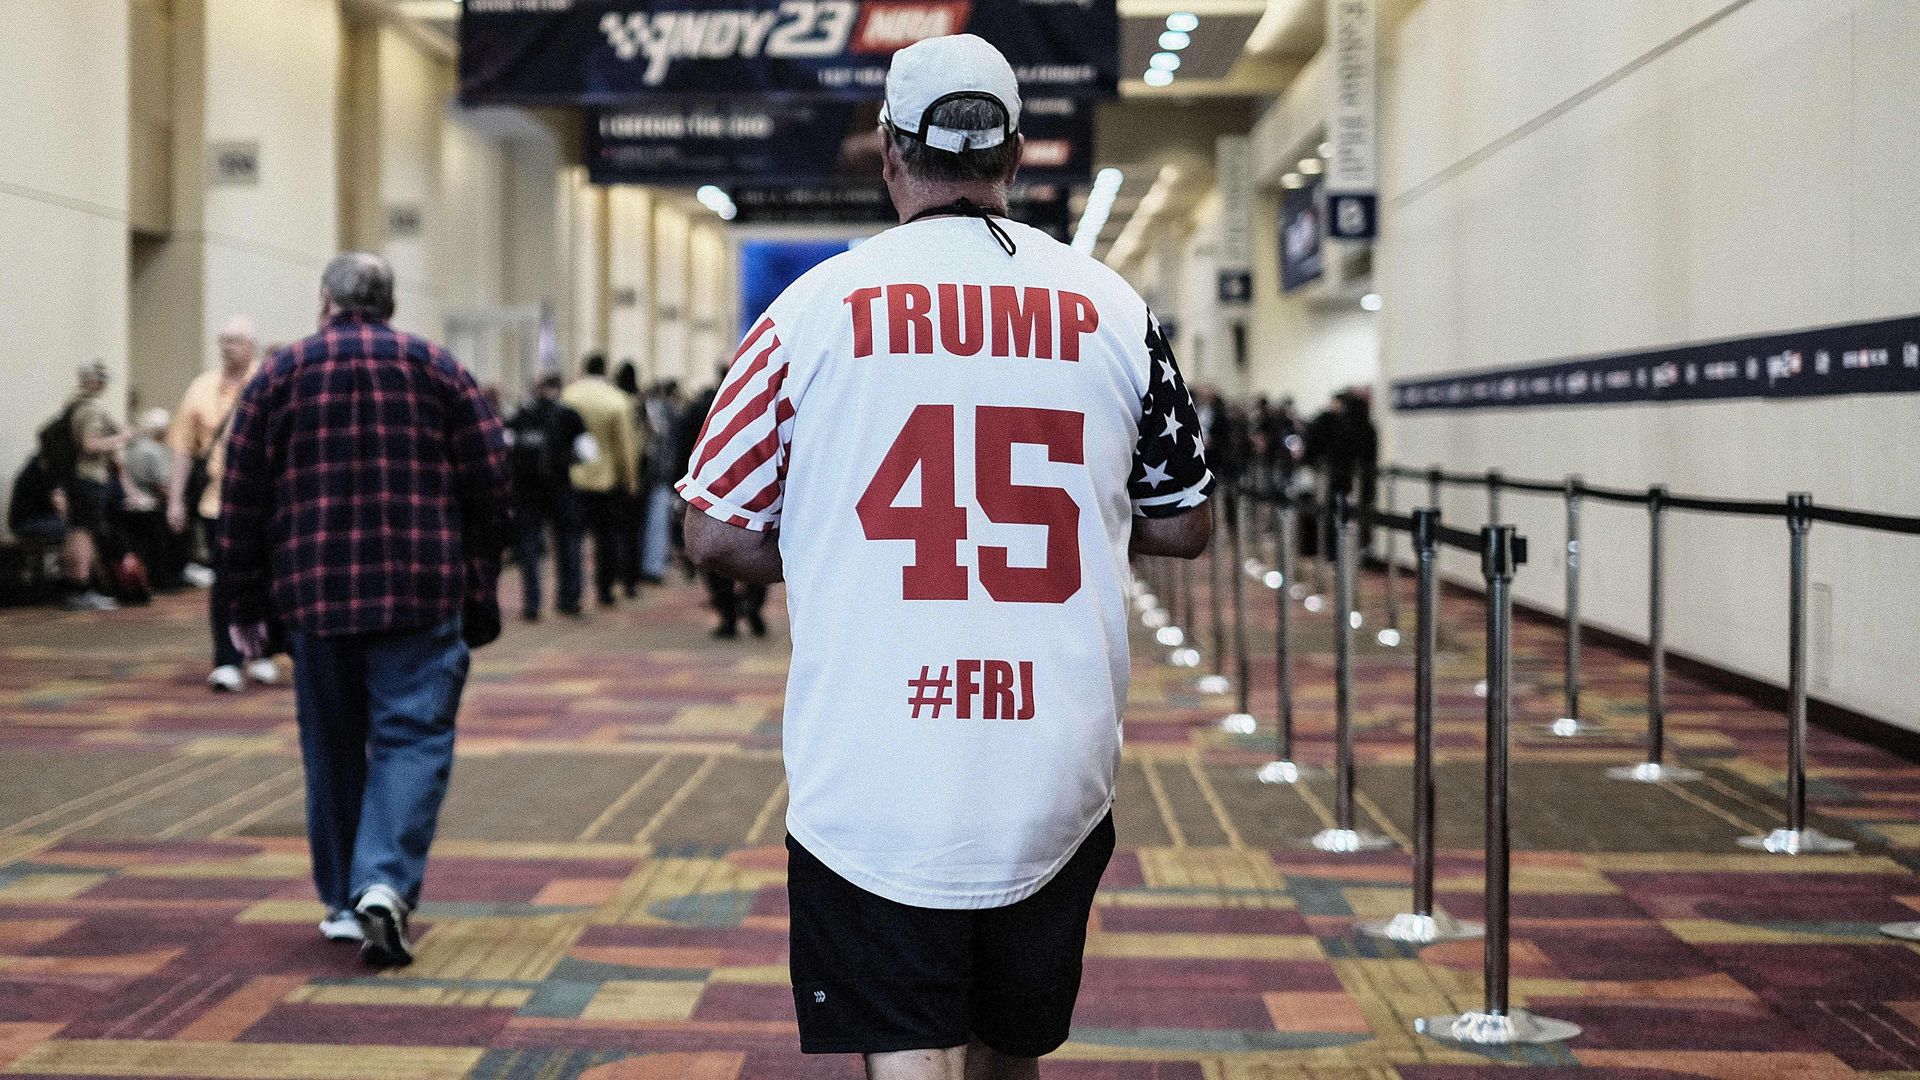 A man wears a Trump jersey at the NRA convention.